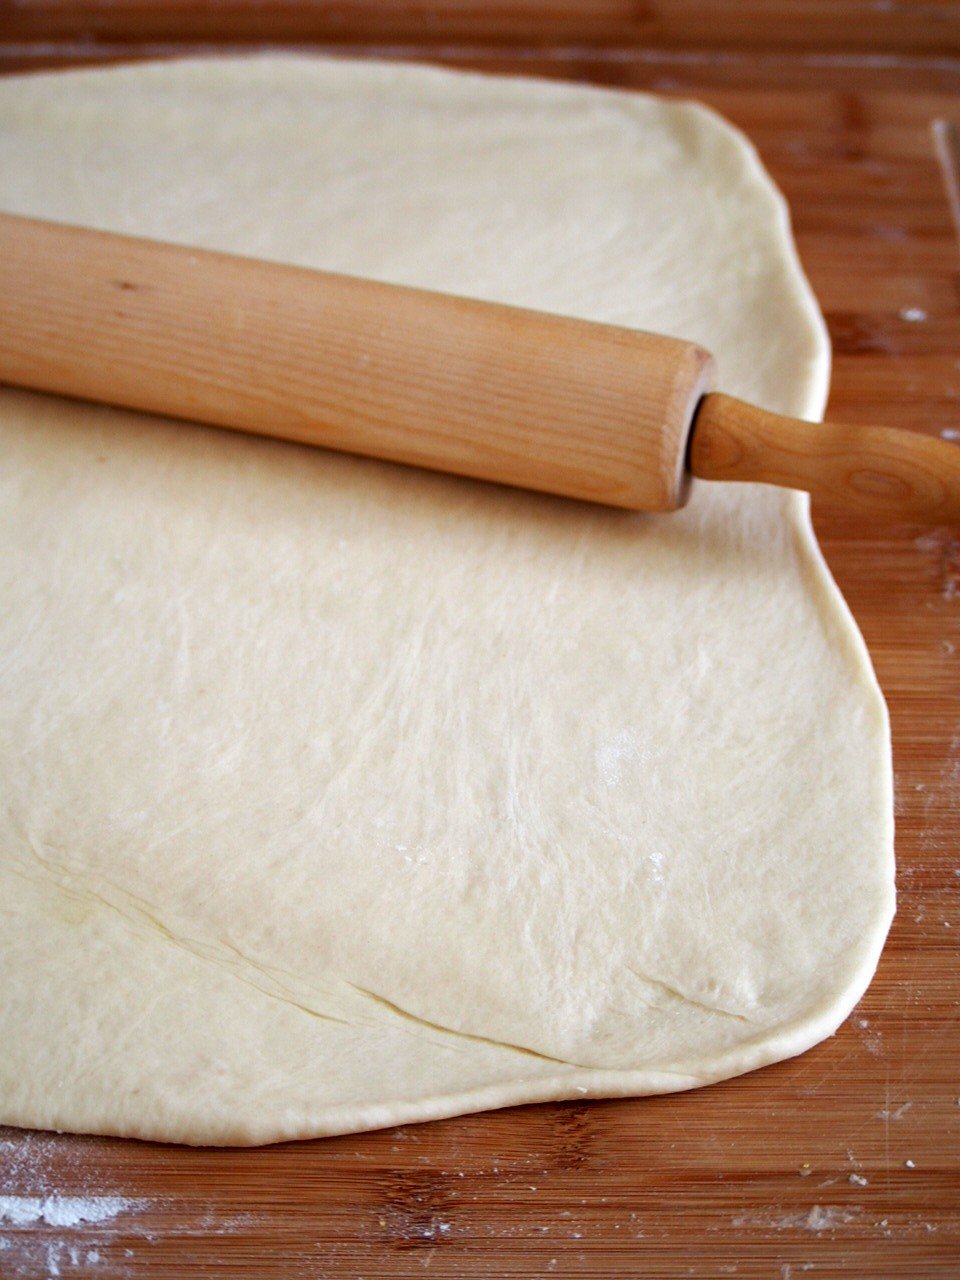 The Cinnamon Roll dough rolled into a rectangle.